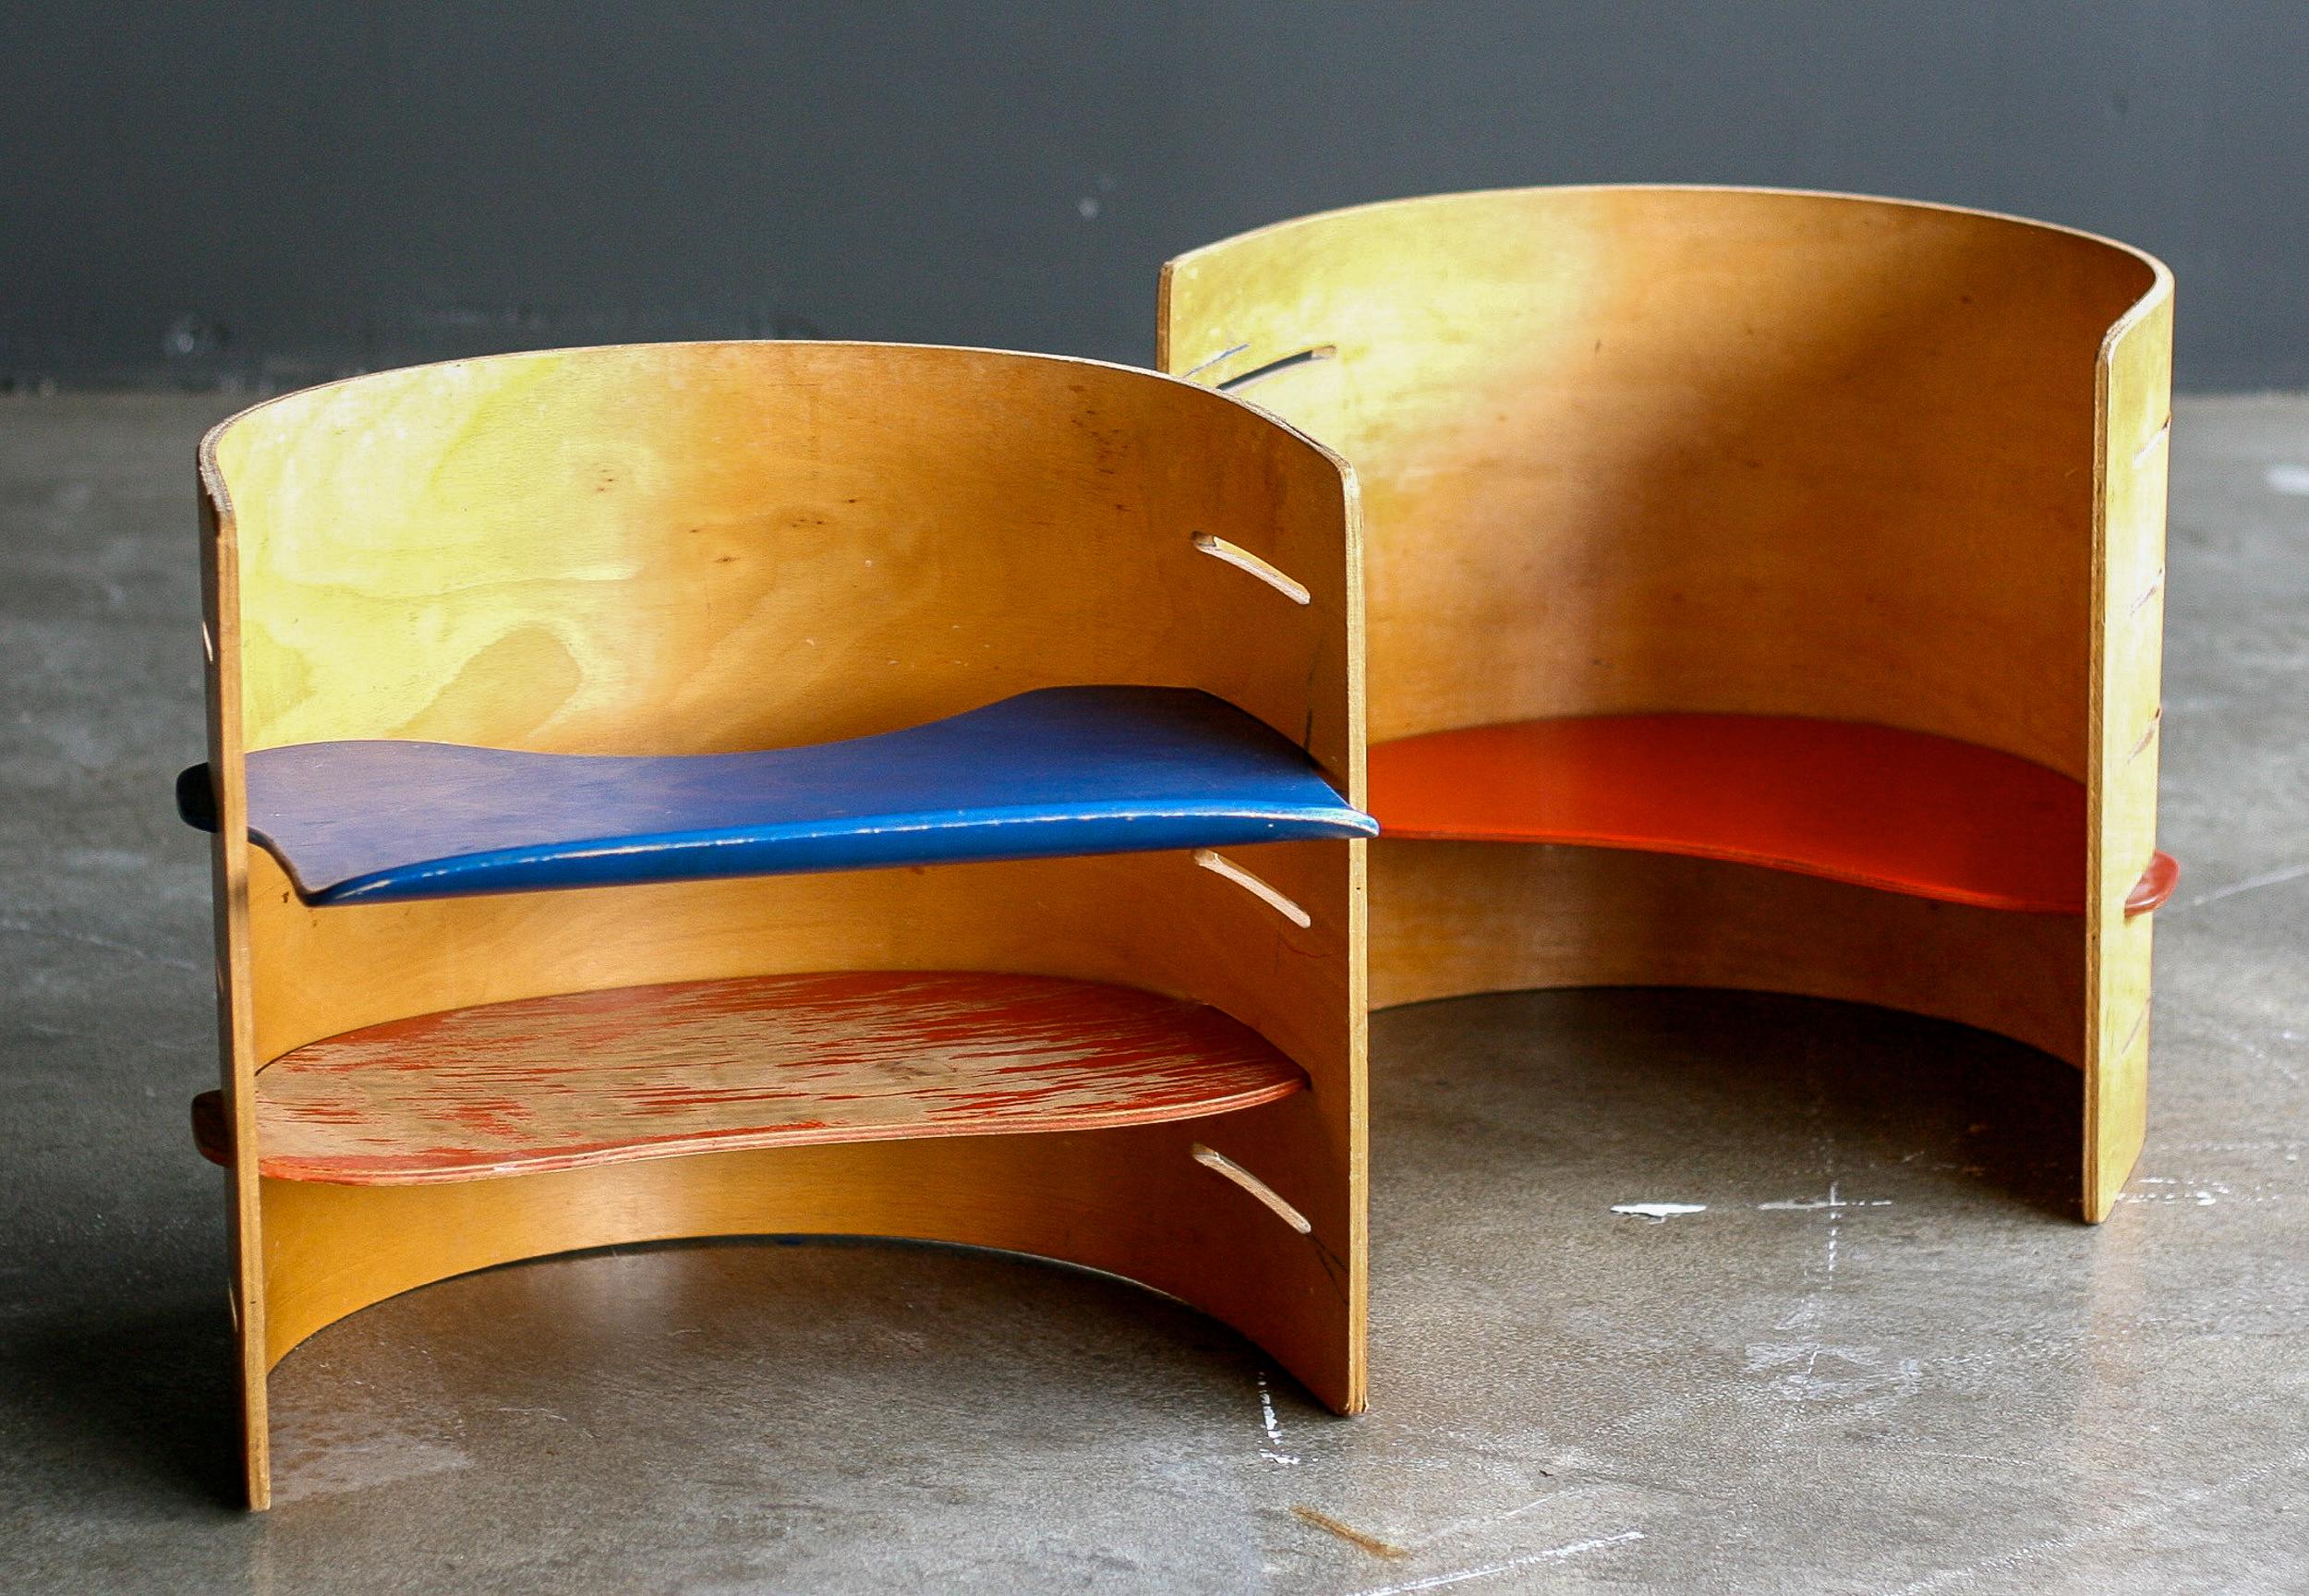 Lacquered Child's Chairs by Kristian Vedel for Torben Orskov, 1957